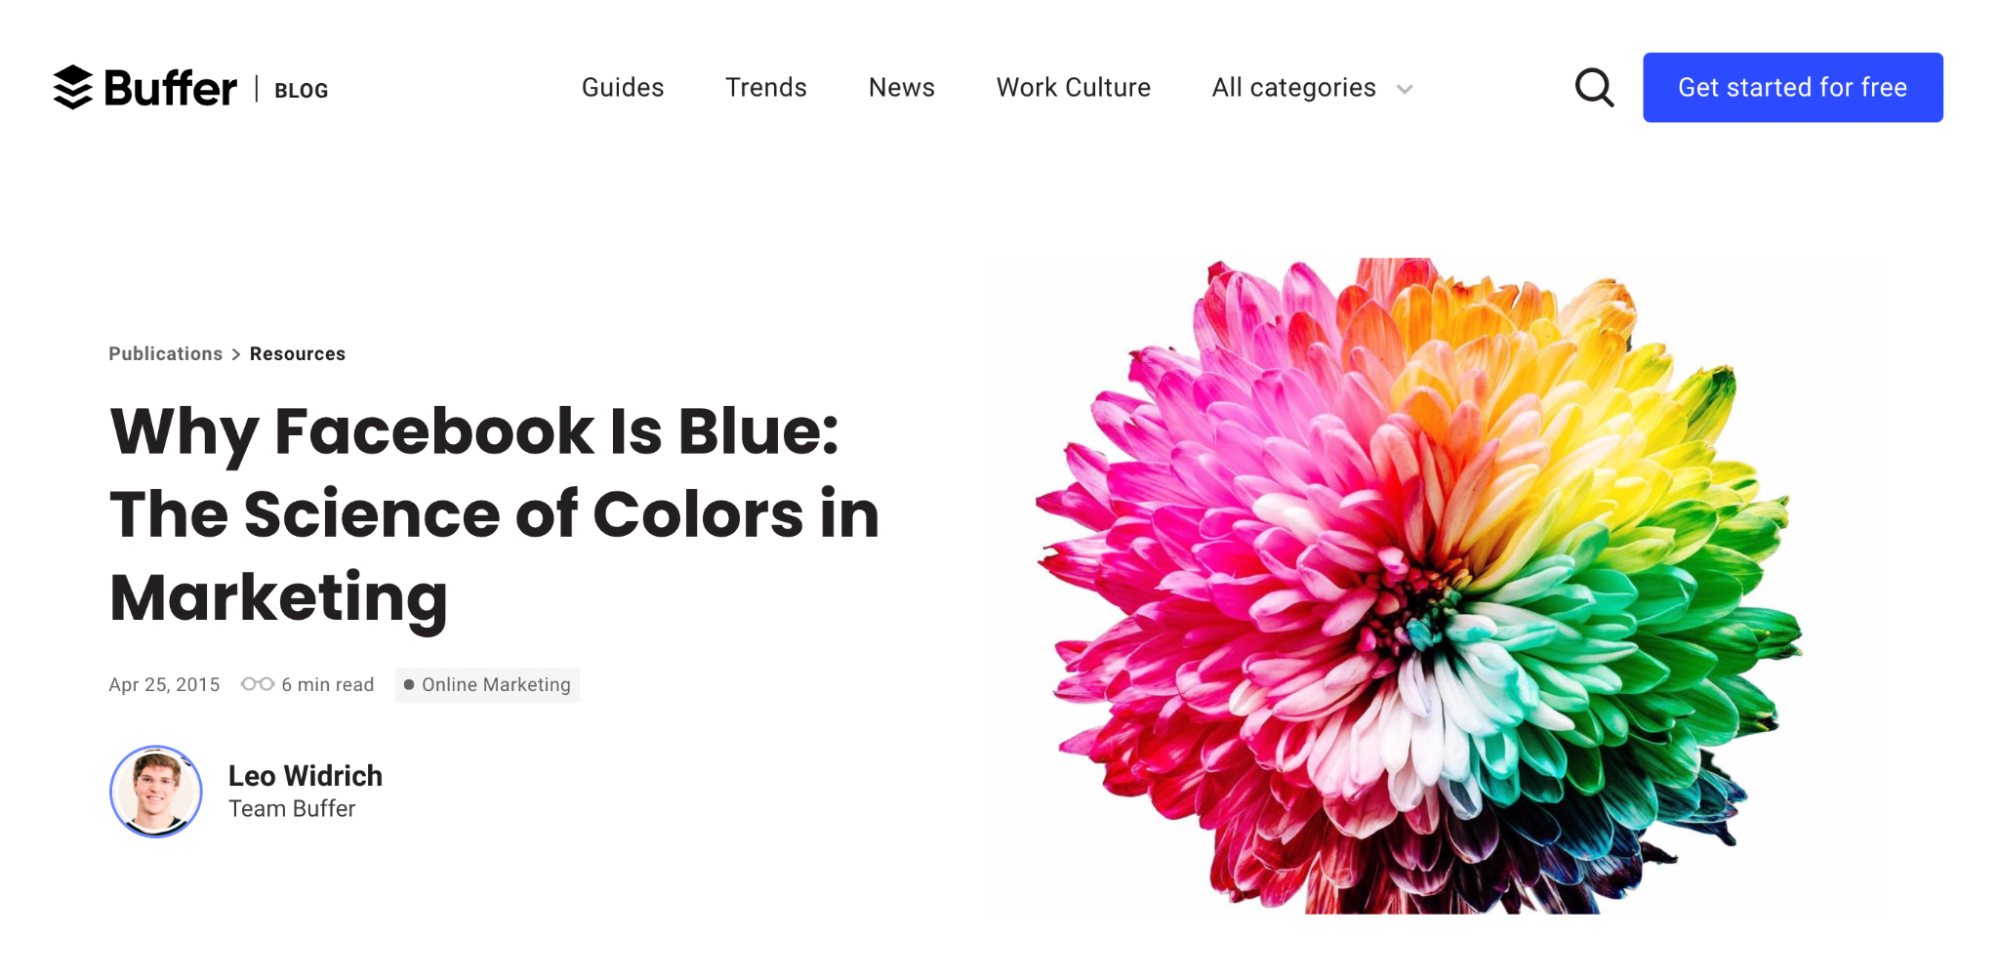 Buffer - Why Facebook Is Blue: The Science of Colors in Marketing